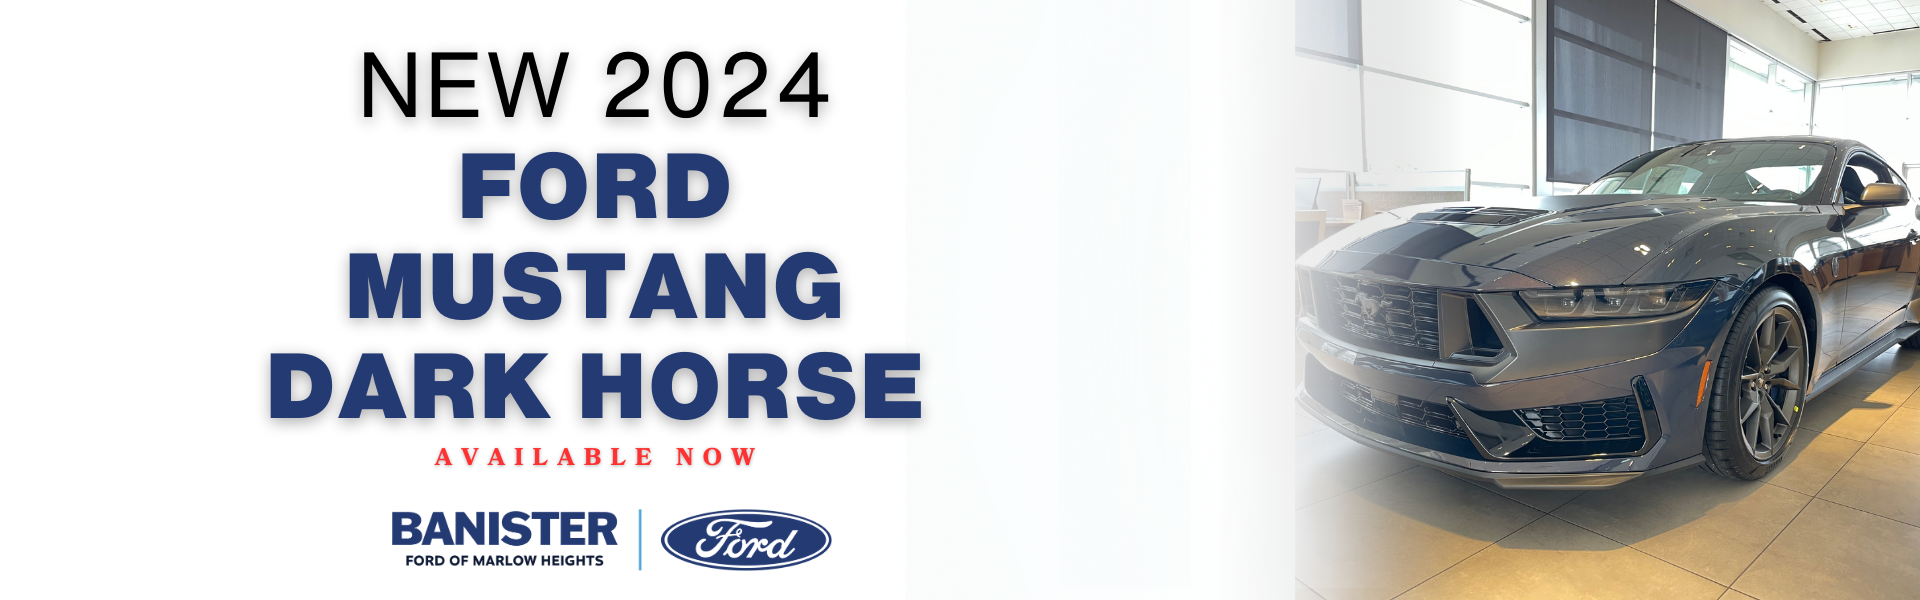 New 2024 Ford Mustang Dark Horse Edition Available Now